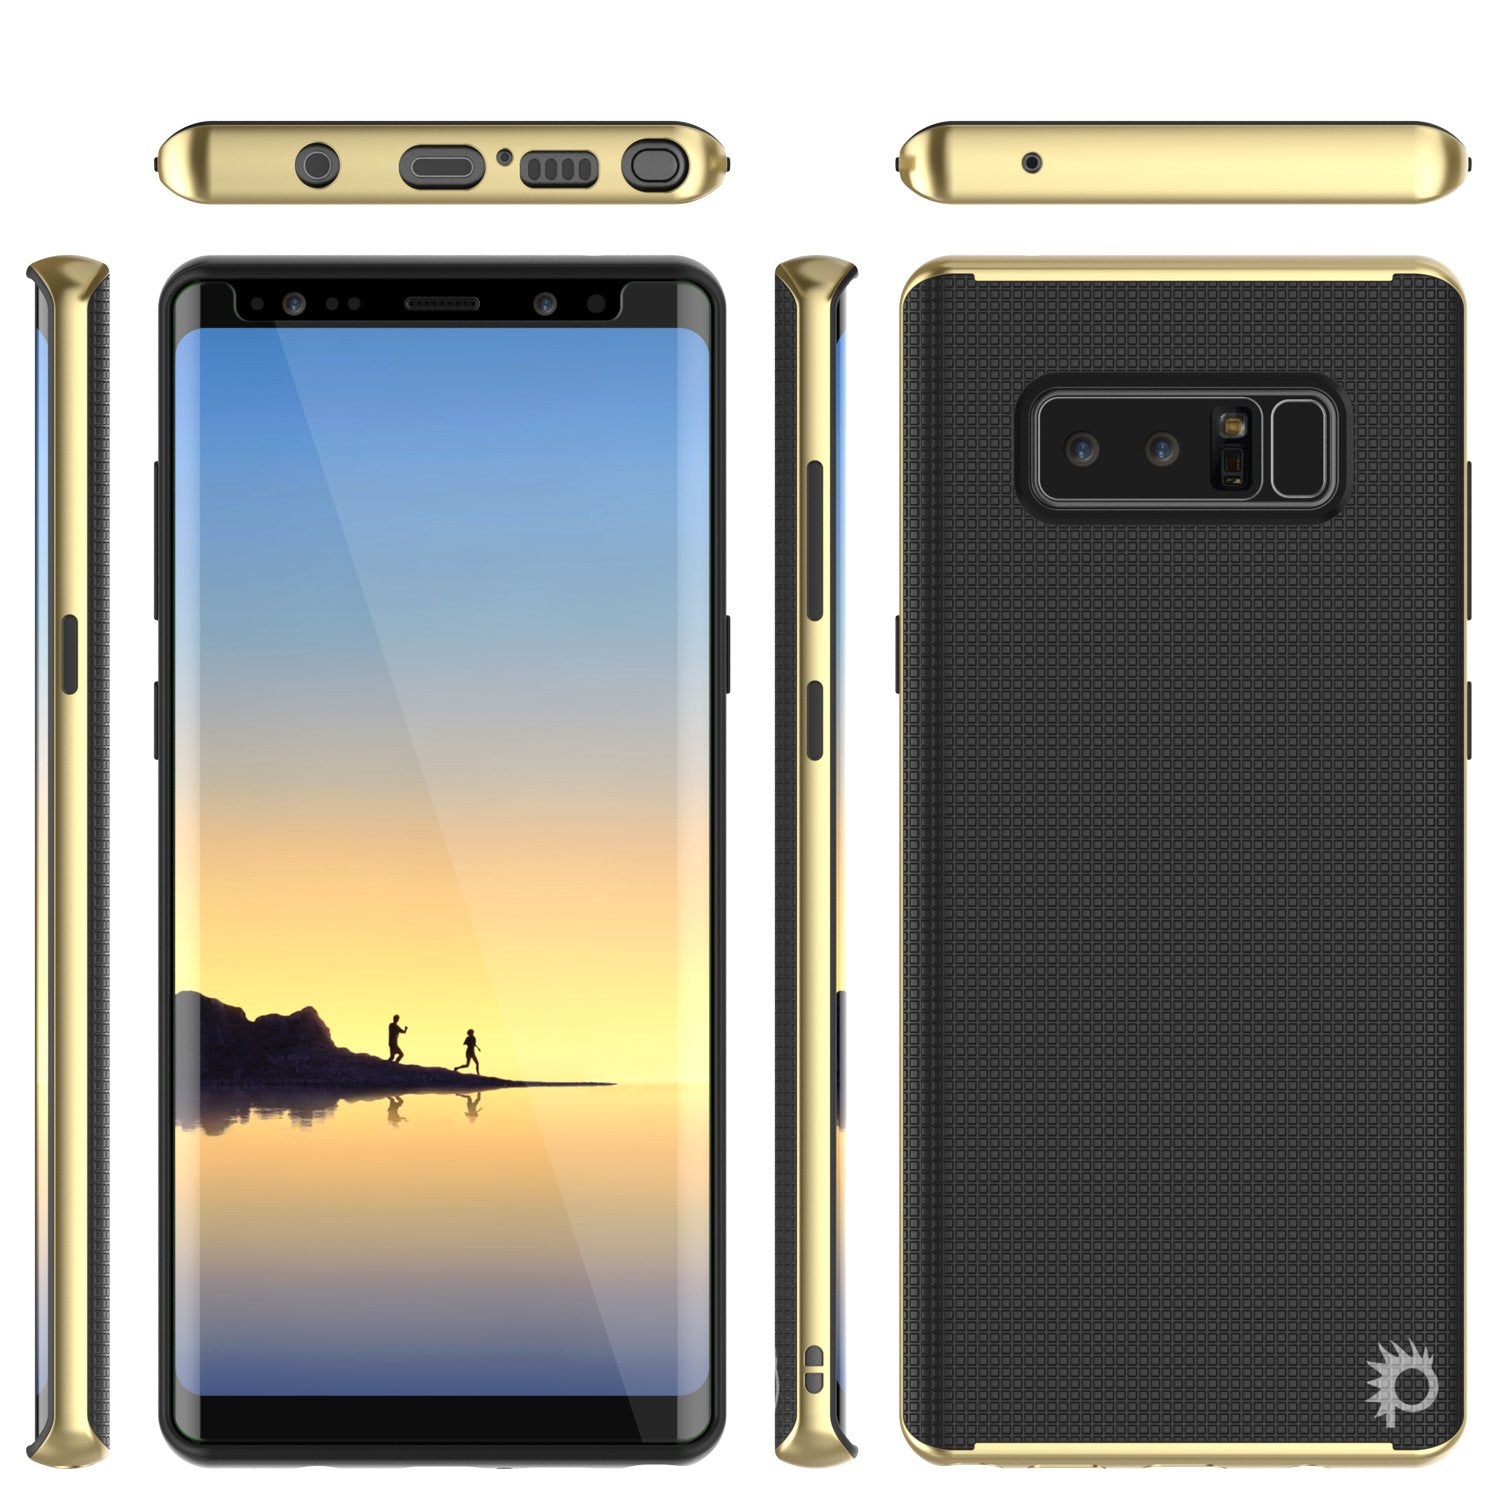 Galaxy Note 8 Case, PunkCase Stealth Gold Series Hybrid 3-Piece Shockproof Dual Layer Cover